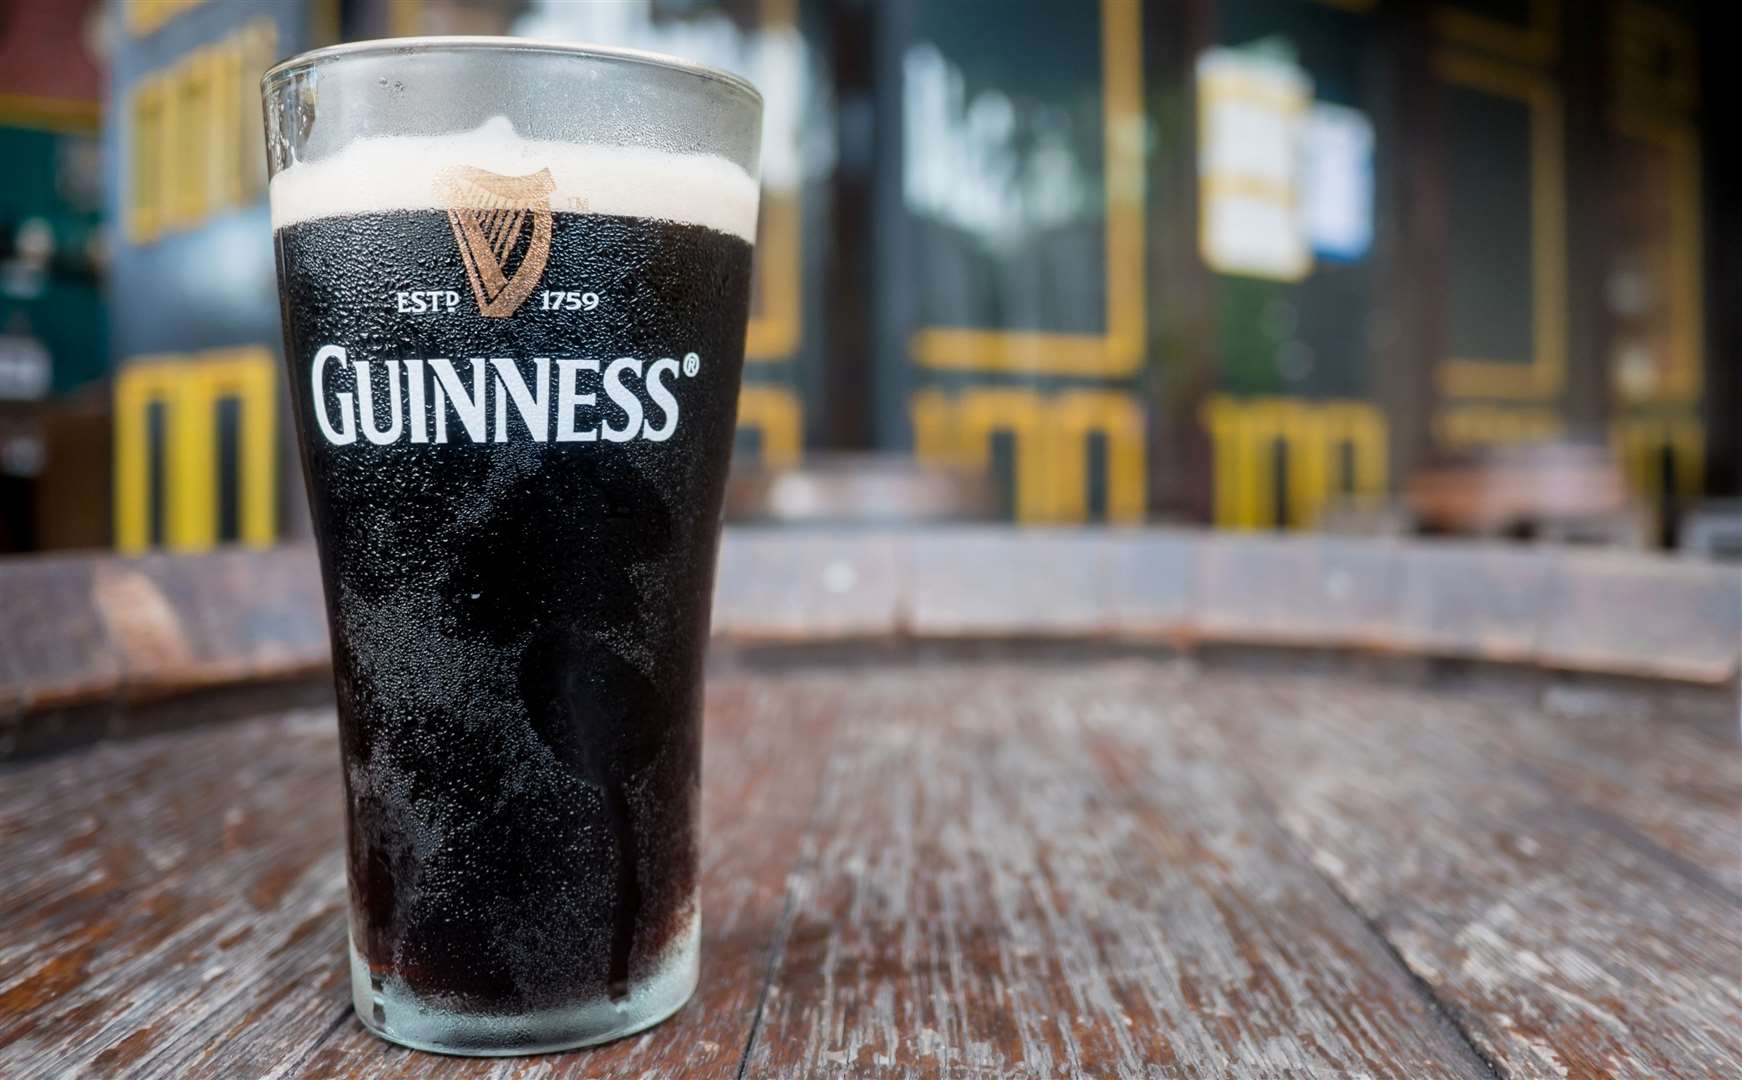 There will be plenty of pints of Guinness poured over the weekend. Picture: iStock